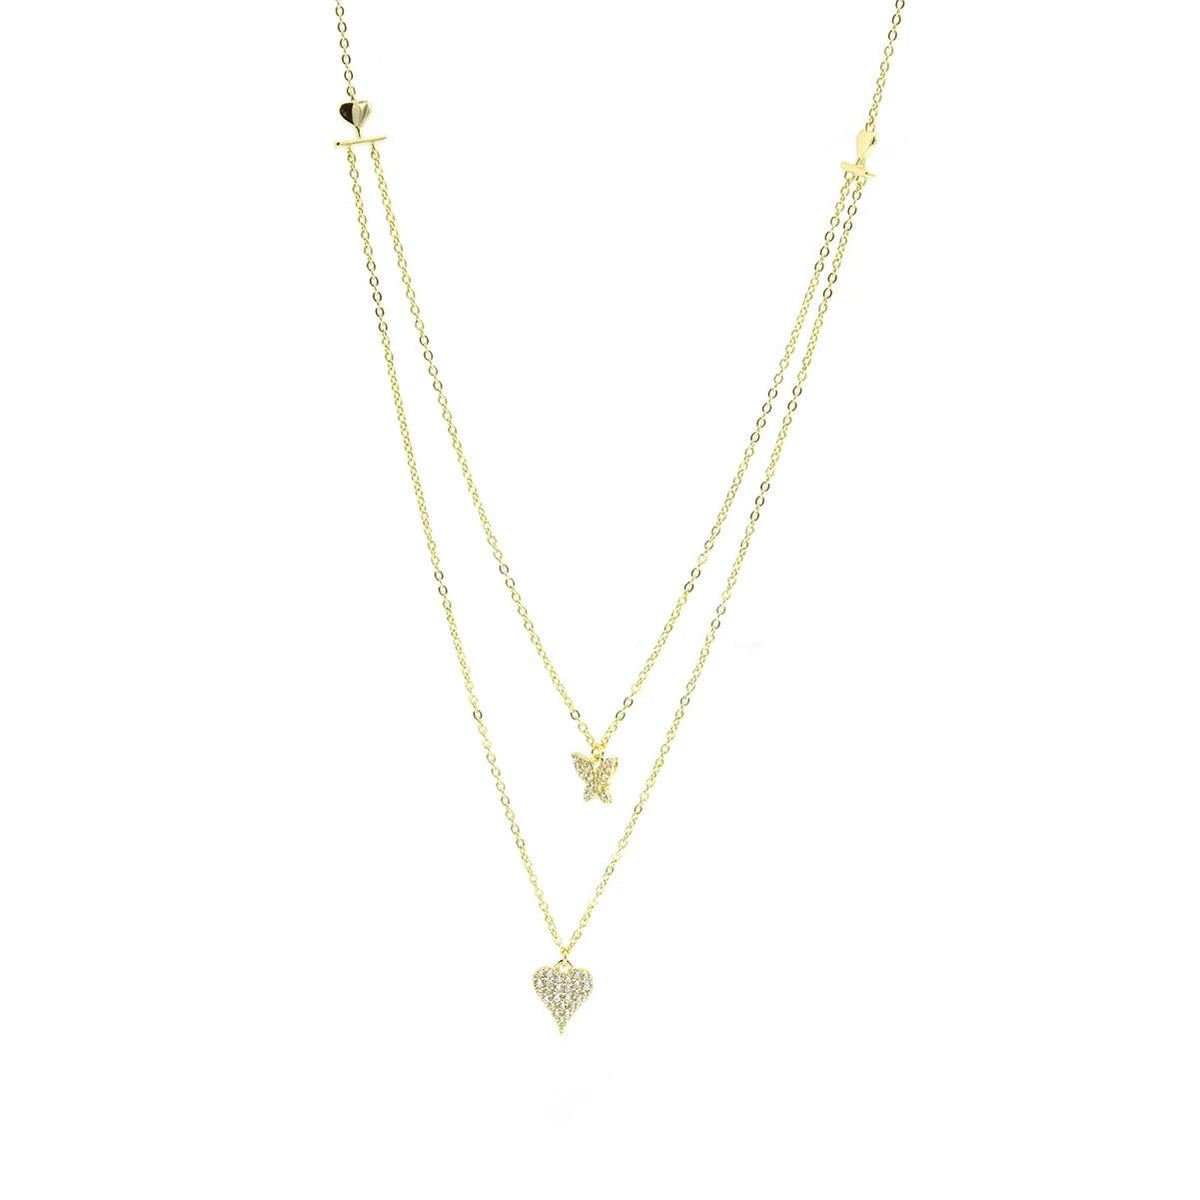 necklaces, gold necklaces, gold butterfly necklaces, gold heart necklaces, necklaces with rhinestones, layered necklaces, layering necklace ideas, dainty necklaces, dainty gold necklaces, fashion jewelry, accessories, fine jewelry, cheap necklaces, affordable jewelry, gold plated necklaces, trending jewelry on tiktok, gift ideas, birthday gifts, anniversary gifts, holiday gifts, gold jewelry 